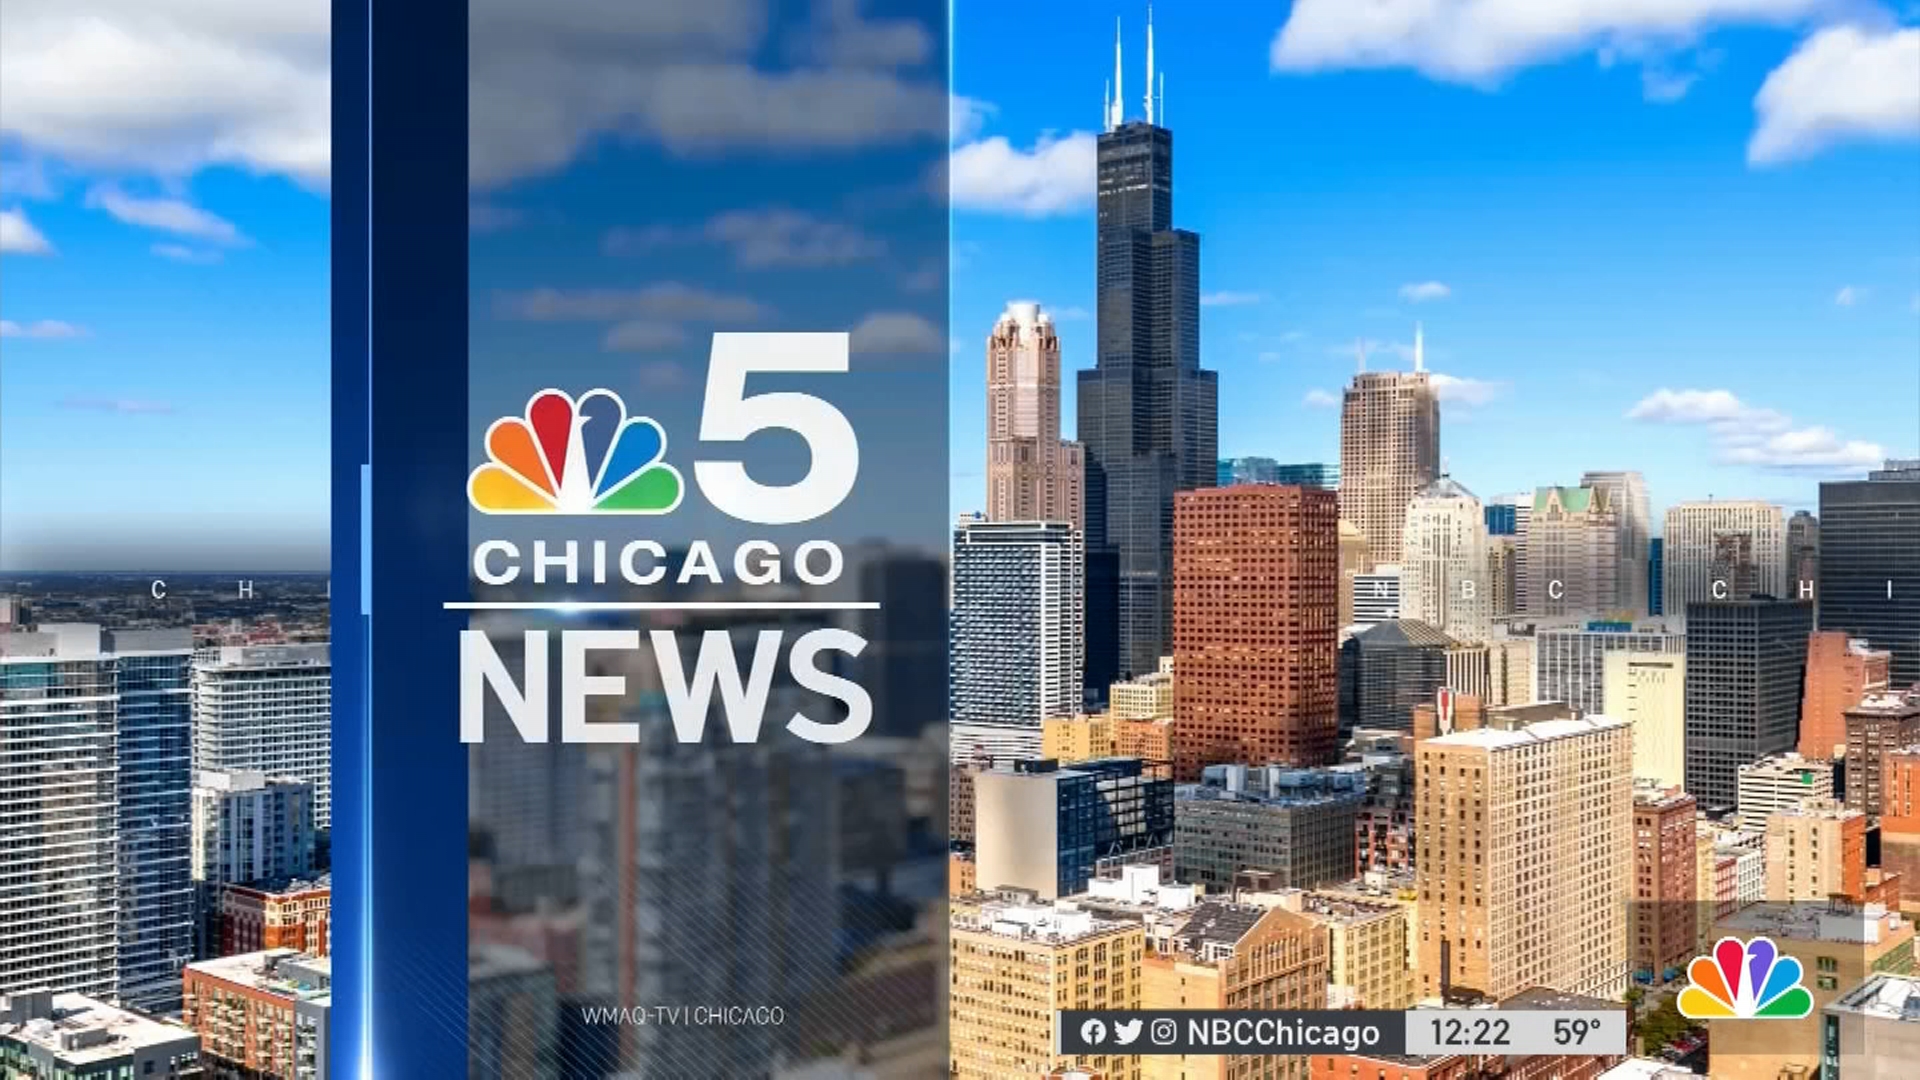 ABC 7 Chicago - The Chicago Blackhawks honor fallen Chicago Police  Commander Paul Bauer by hanging a jersey in their dressing room for  tonight's game.  Photo Credit: Chicago Blackhawks